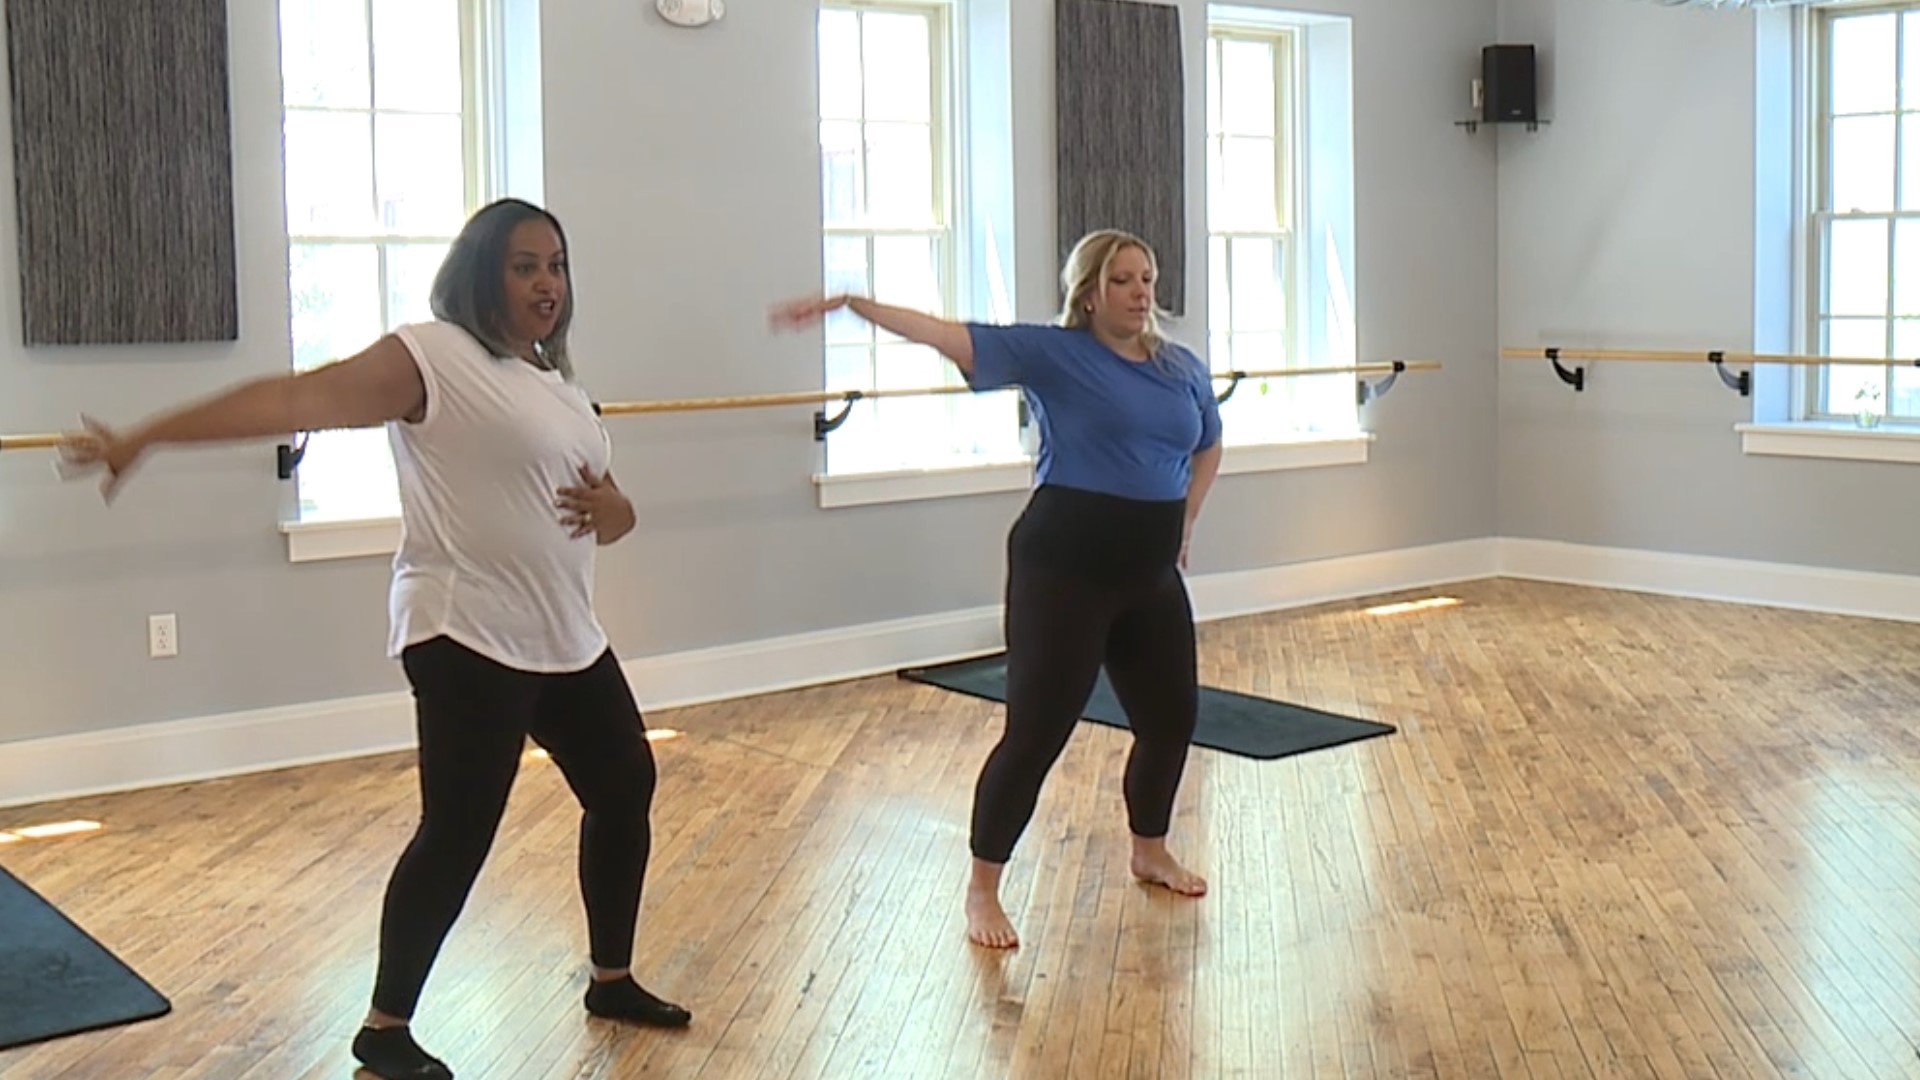 Move it Studio has a bunch of classes focused on bringing their clients happiness and routine.